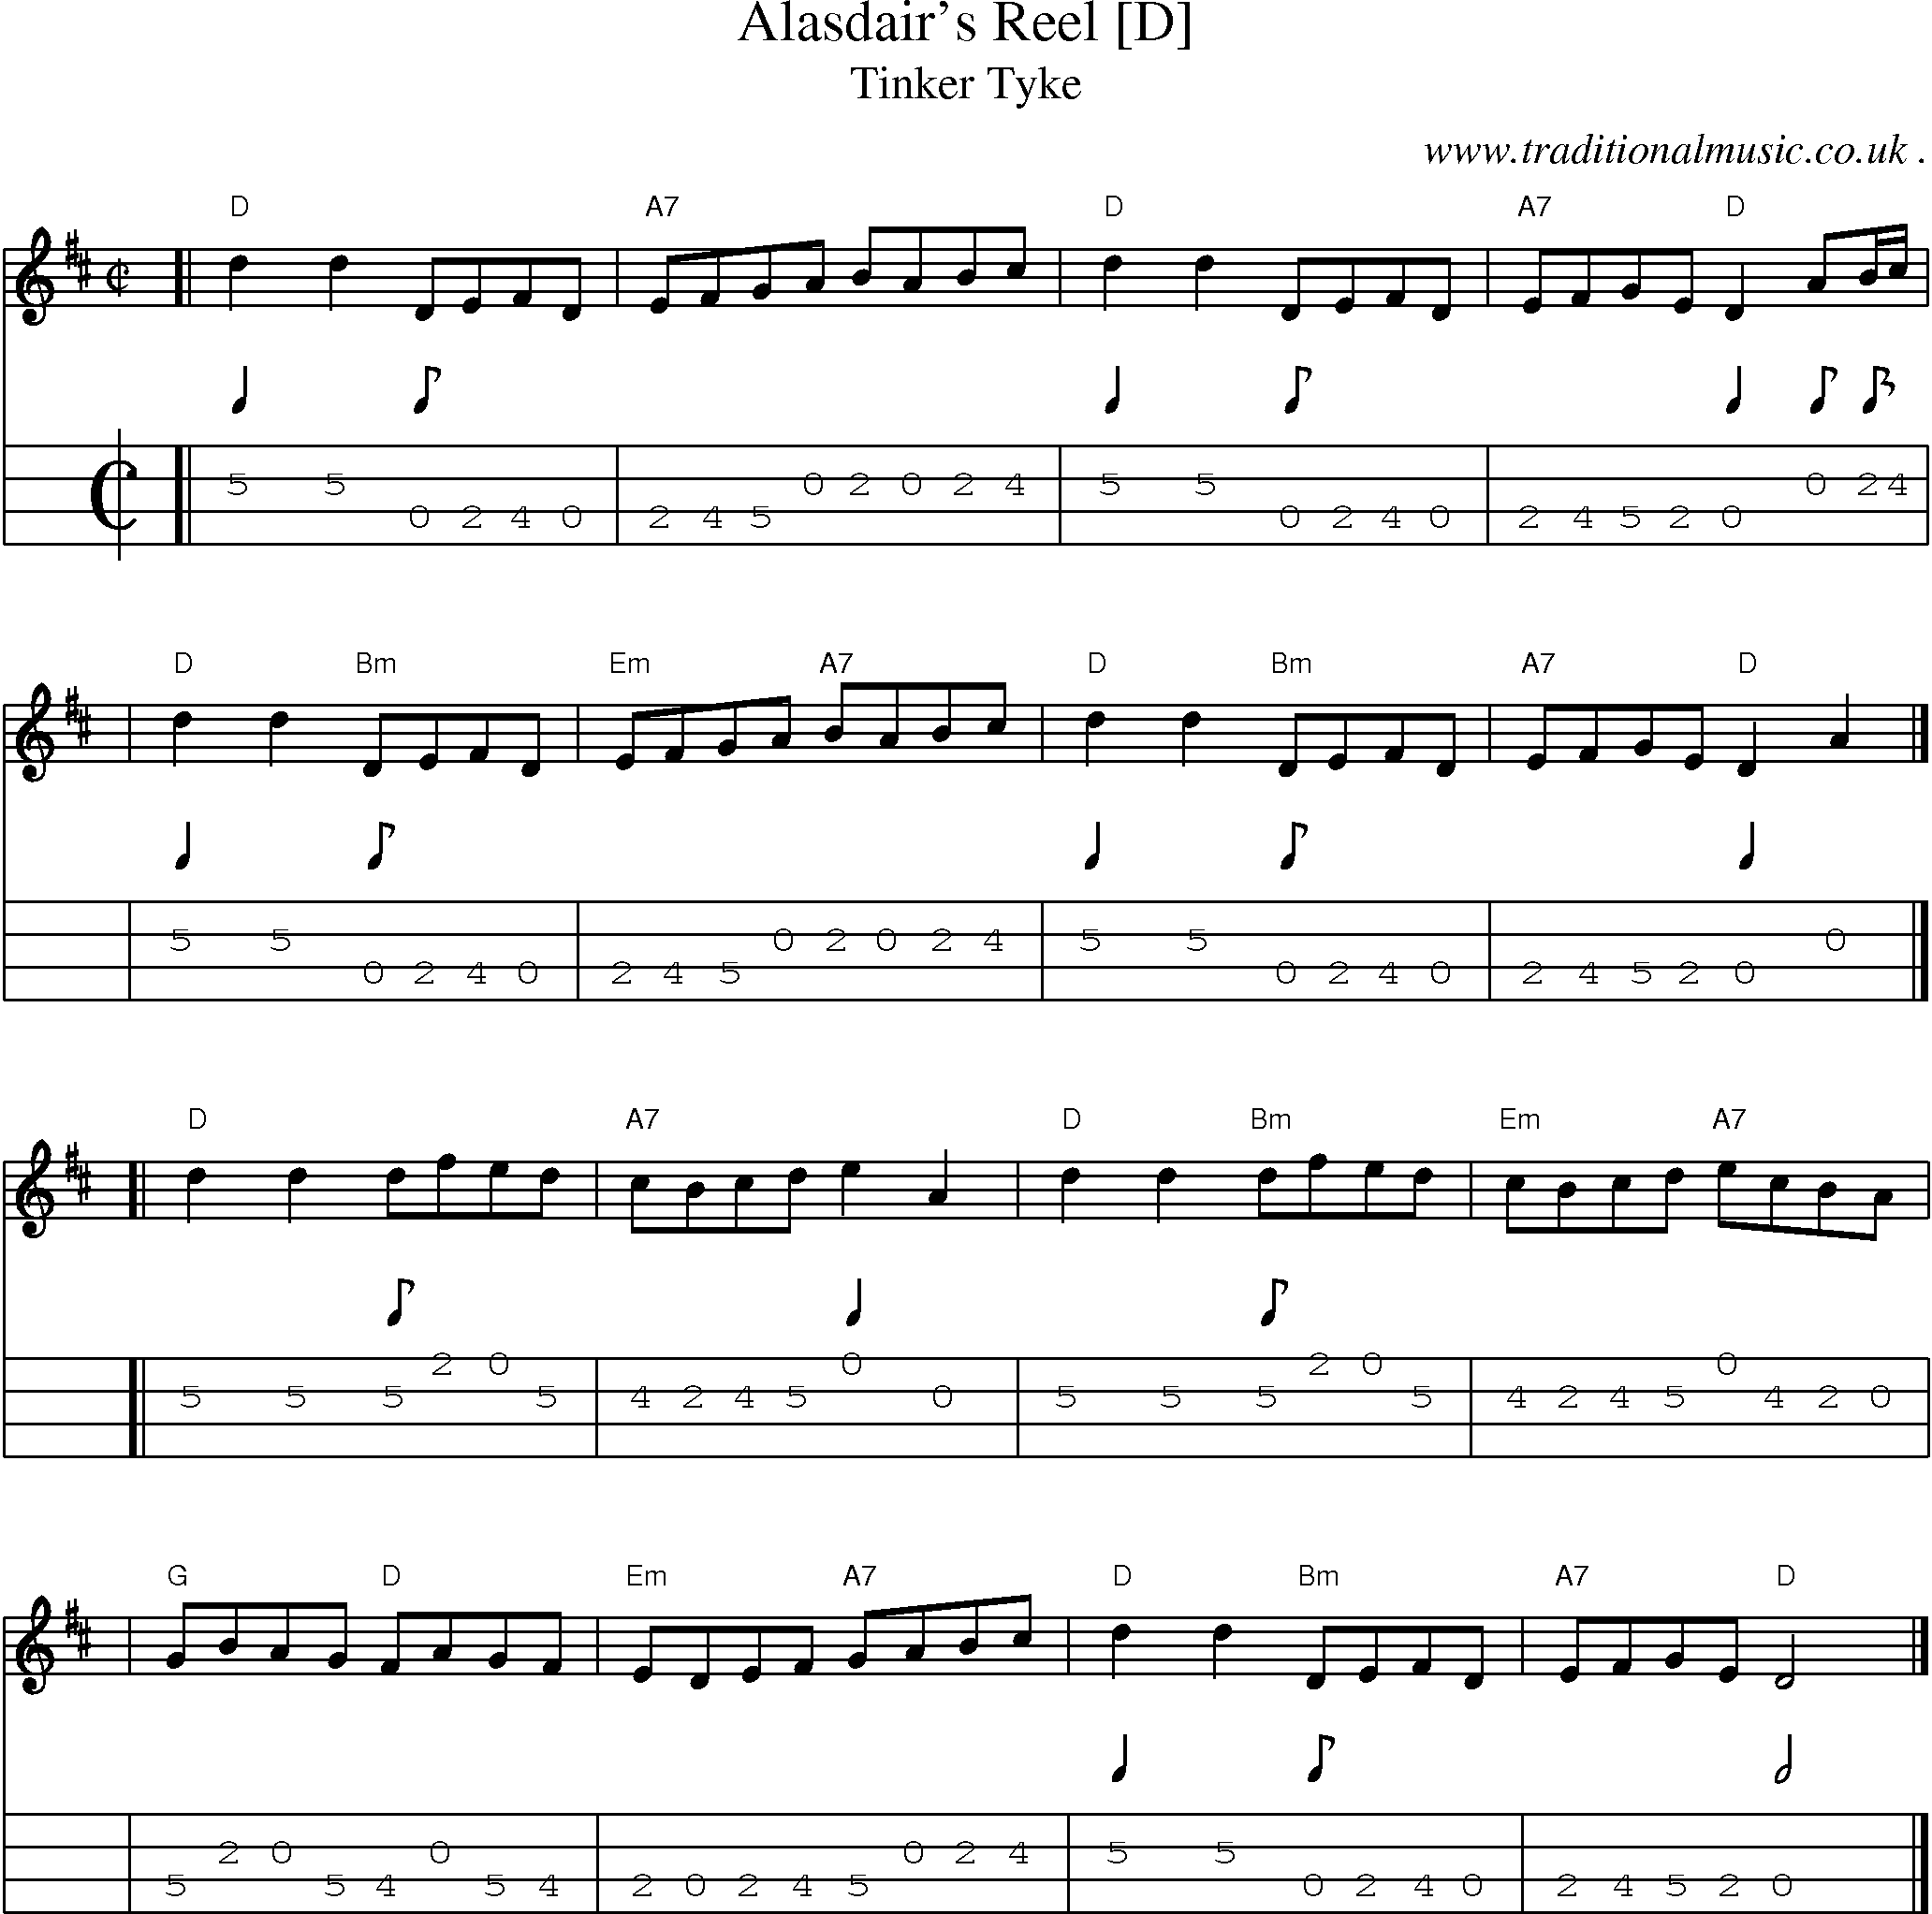 Sheet-music  score, Chords and Mandolin Tabs for Alasdairs Reel [d]